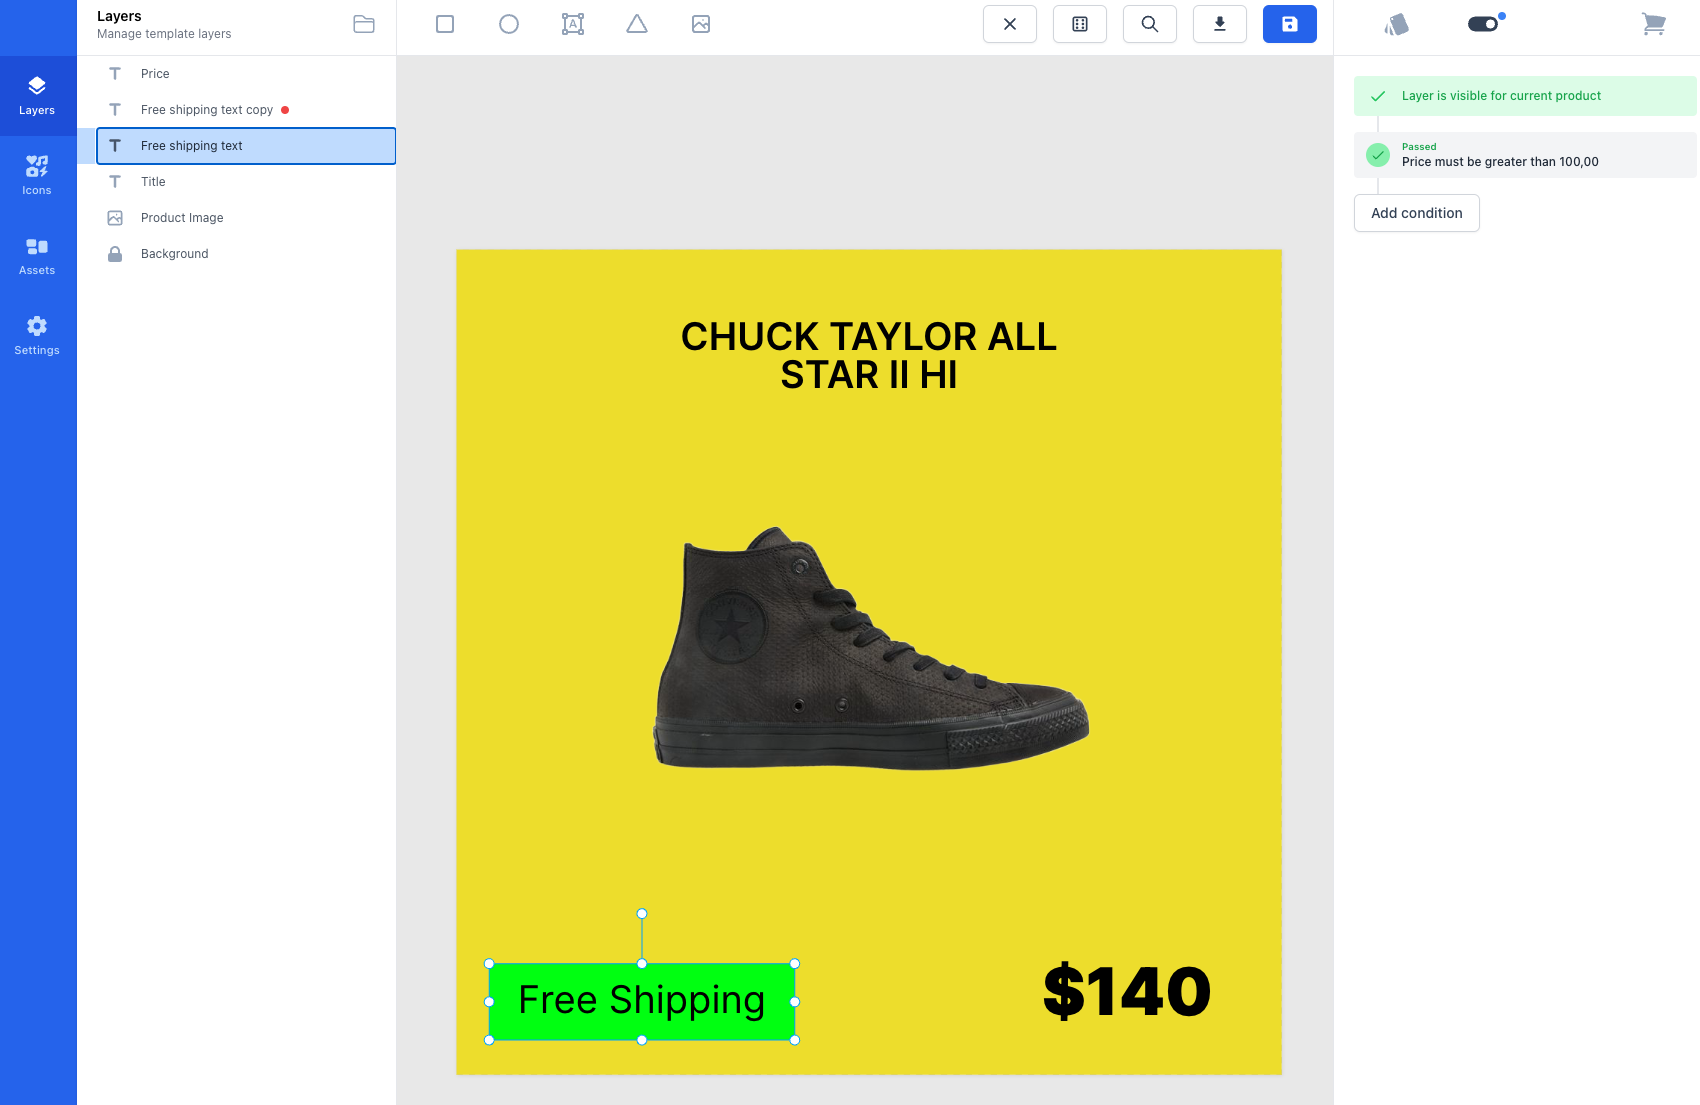 Shows free shipping if the shipping price greater than $100